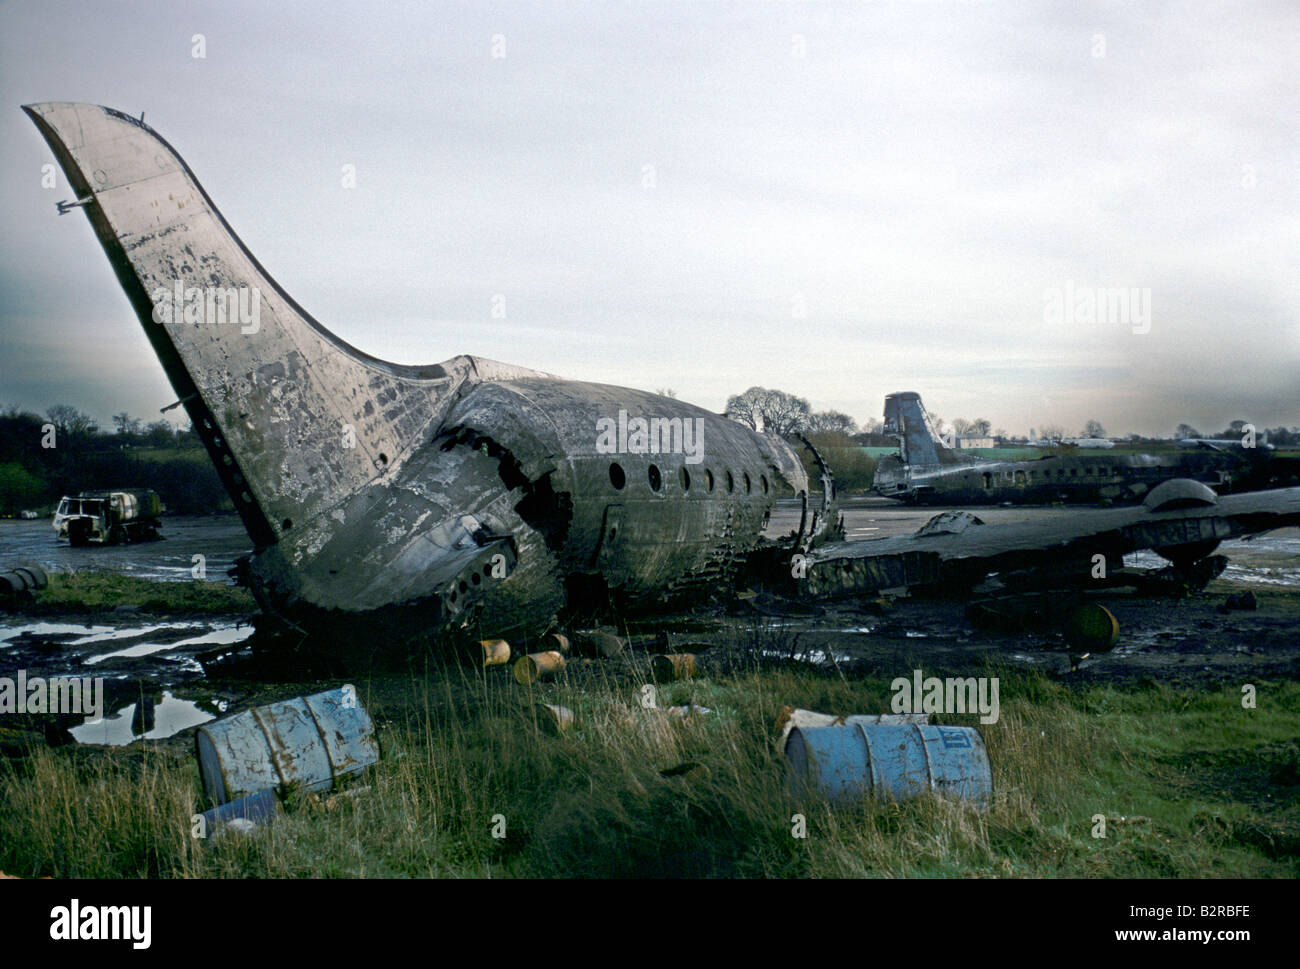 Fire drill on an old disused, damaged plane at Stansted airport, UK Stock Photo